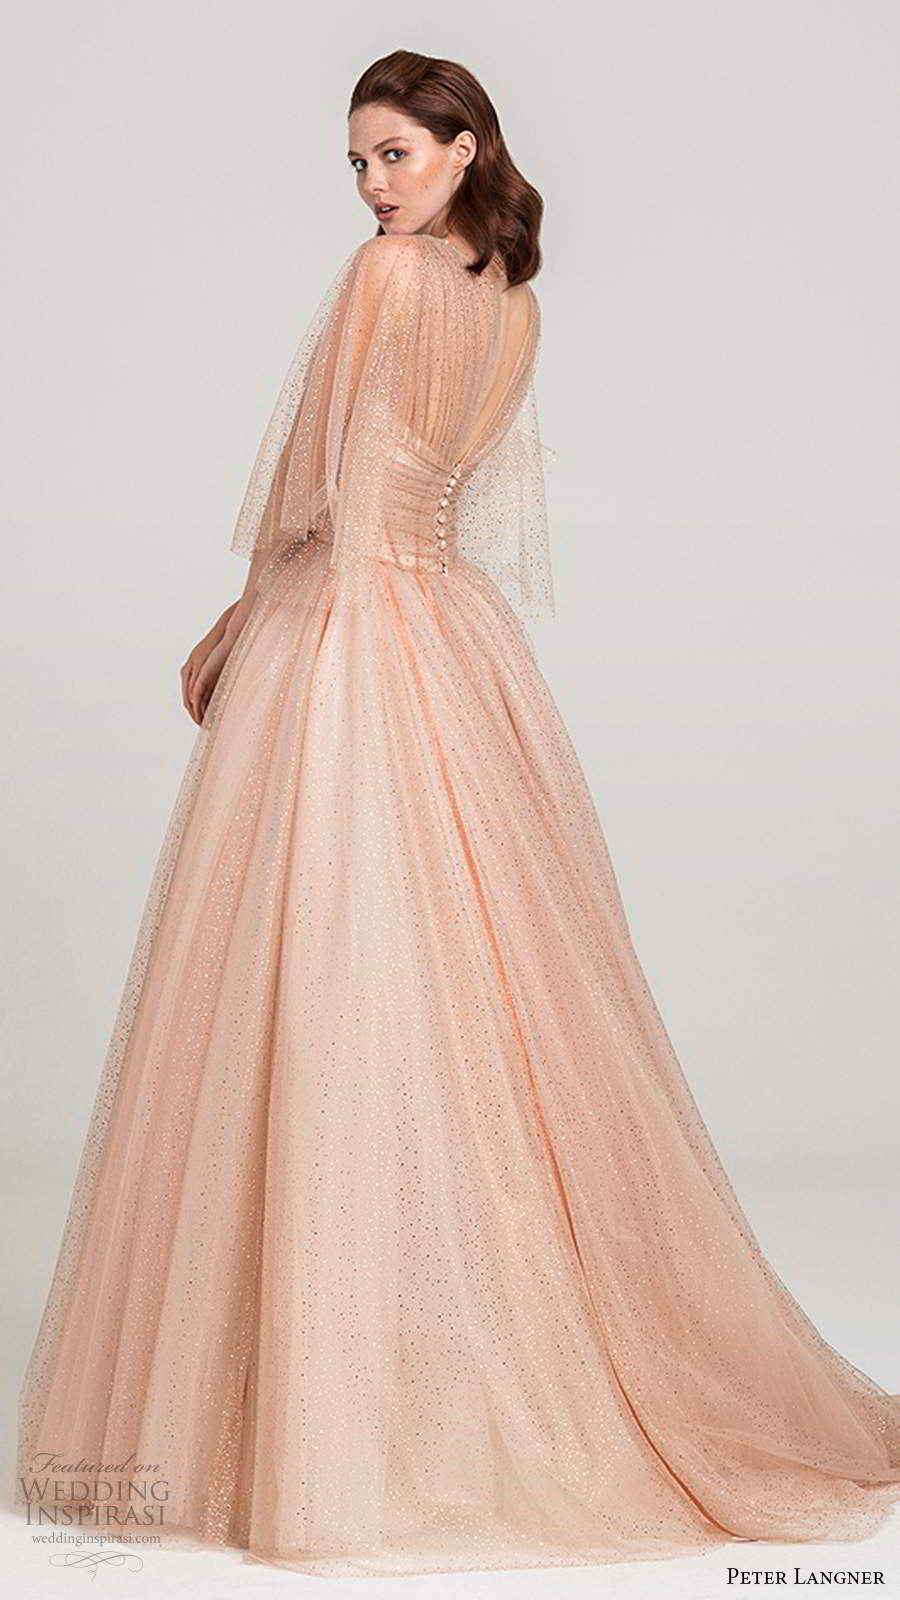 peter langner fall 2020 bridal illusion elbow length flutter sleeves v neckline ruched bodice a line ball gown wedding dress blush color chapel train (9) bv